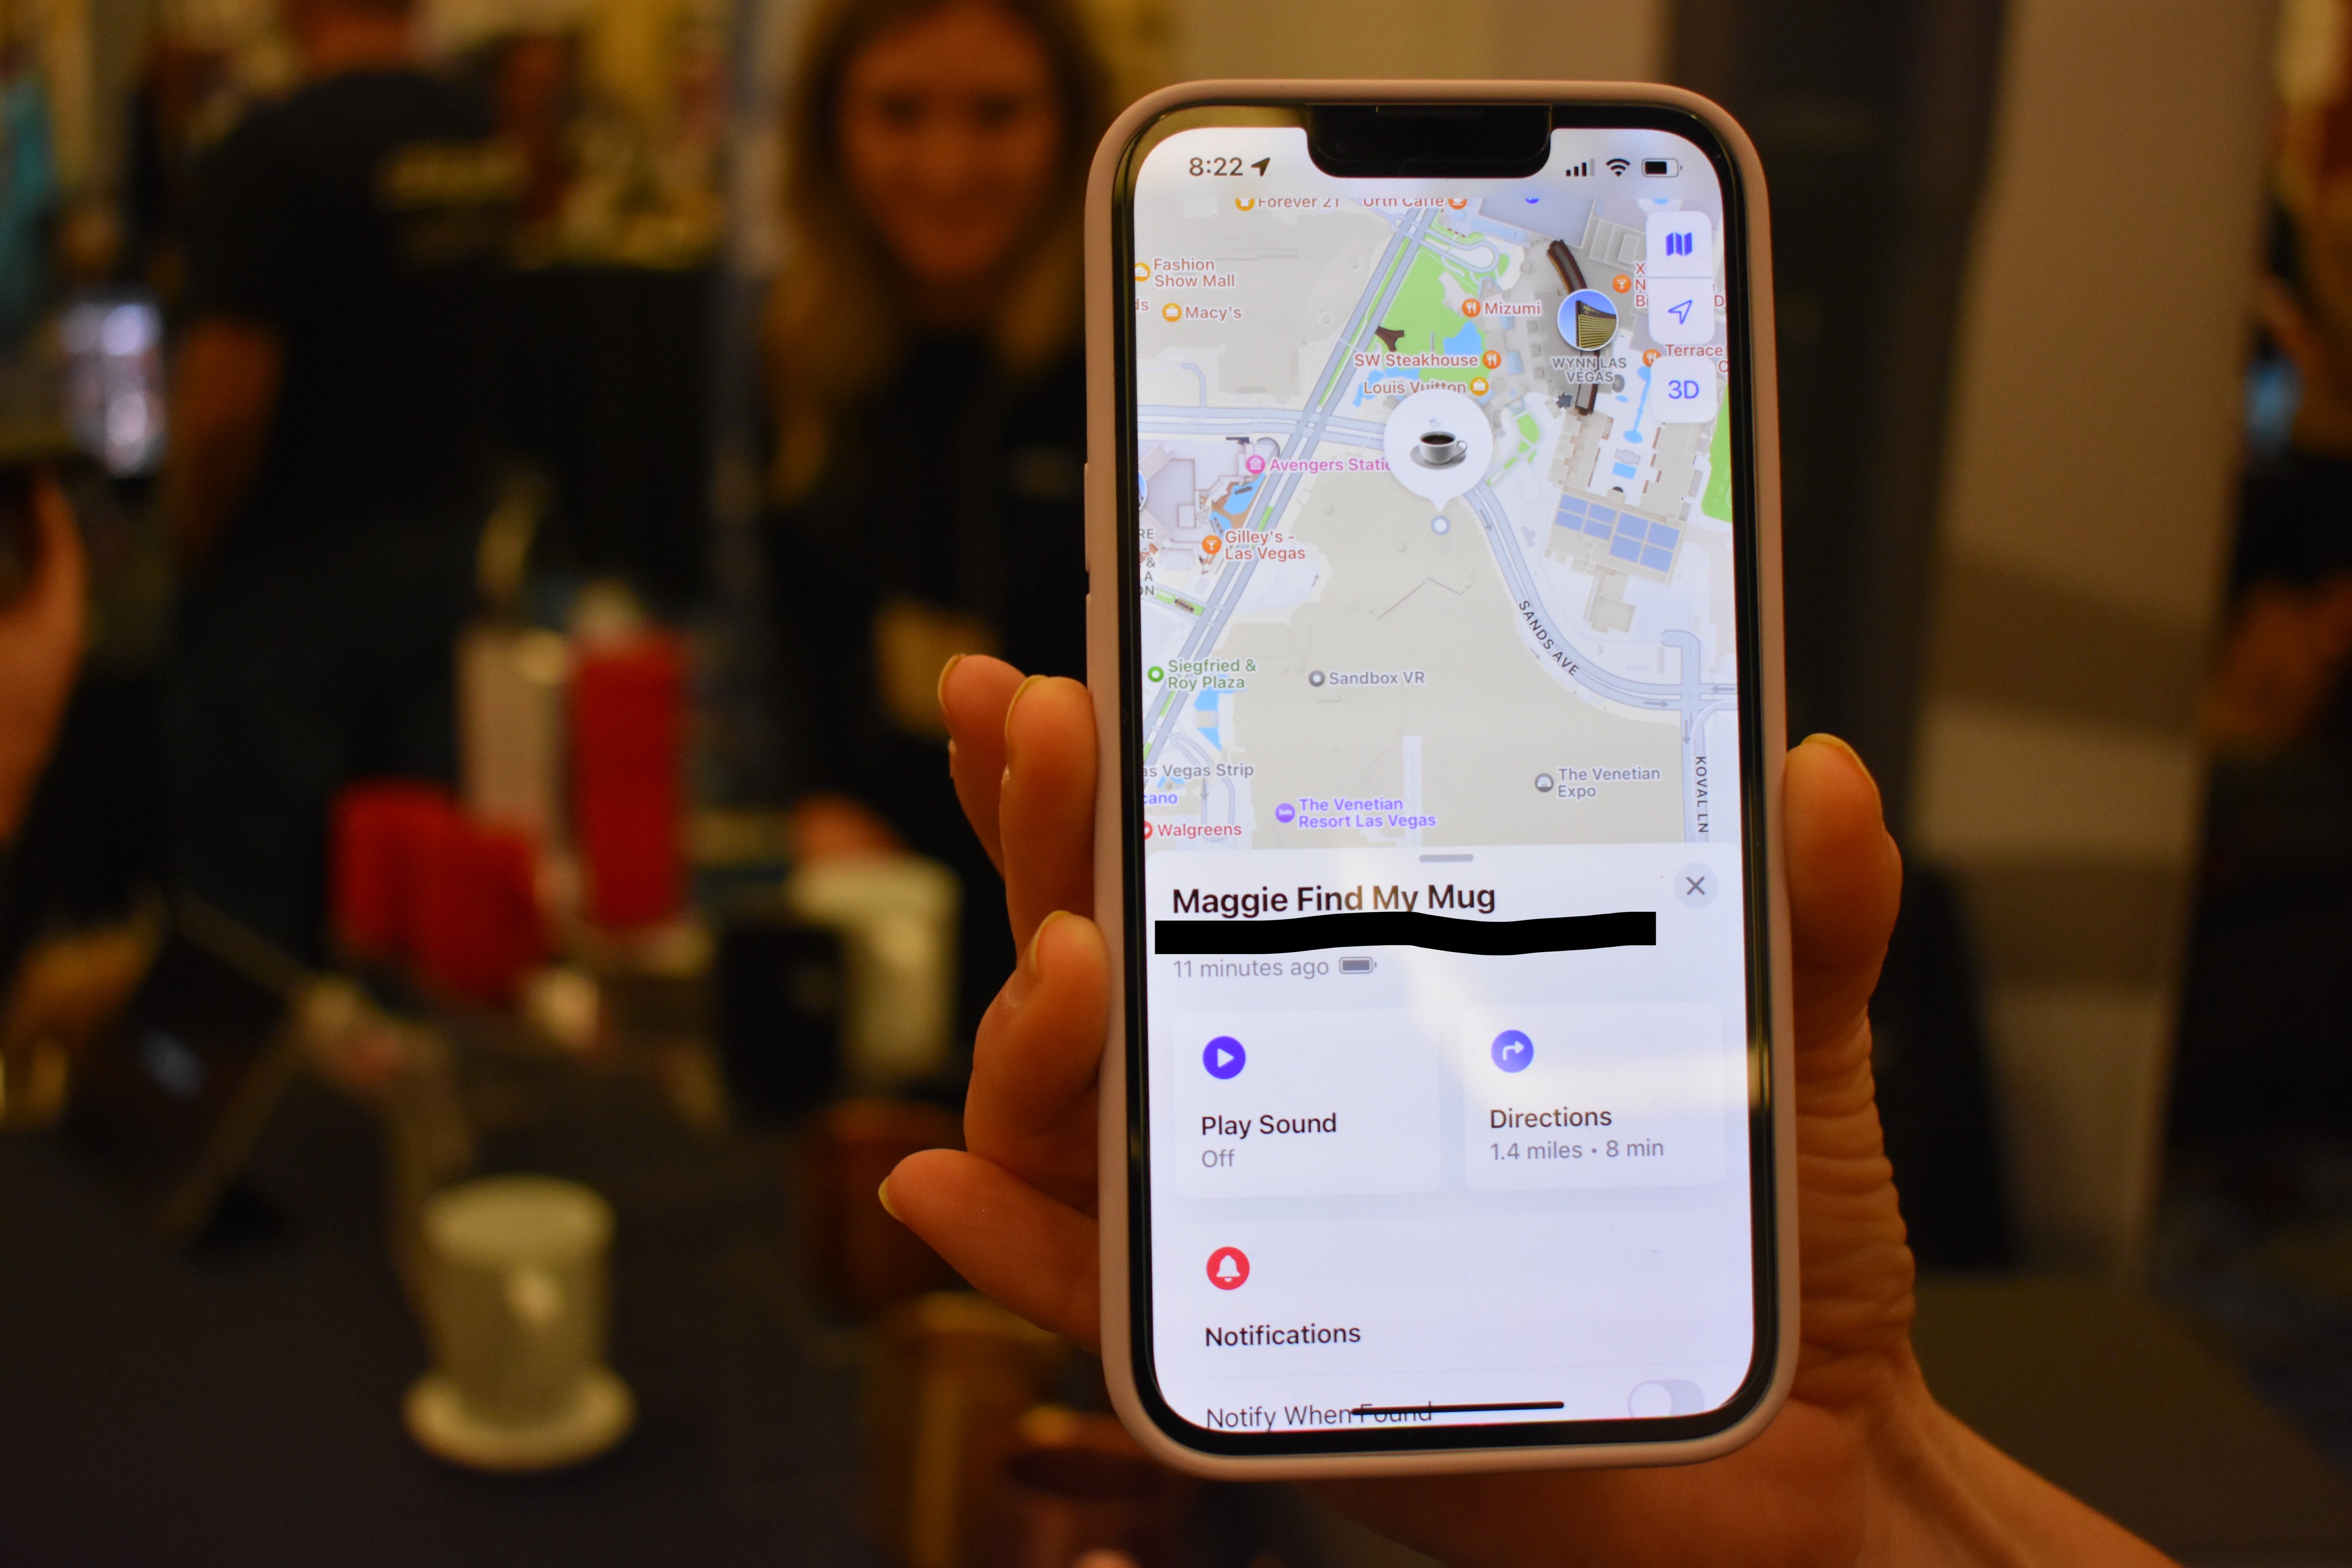 The Apple Find My feature showing the location and address of the person's mug half a mile away. (Photo: Kyle Barr/Gizmodo)